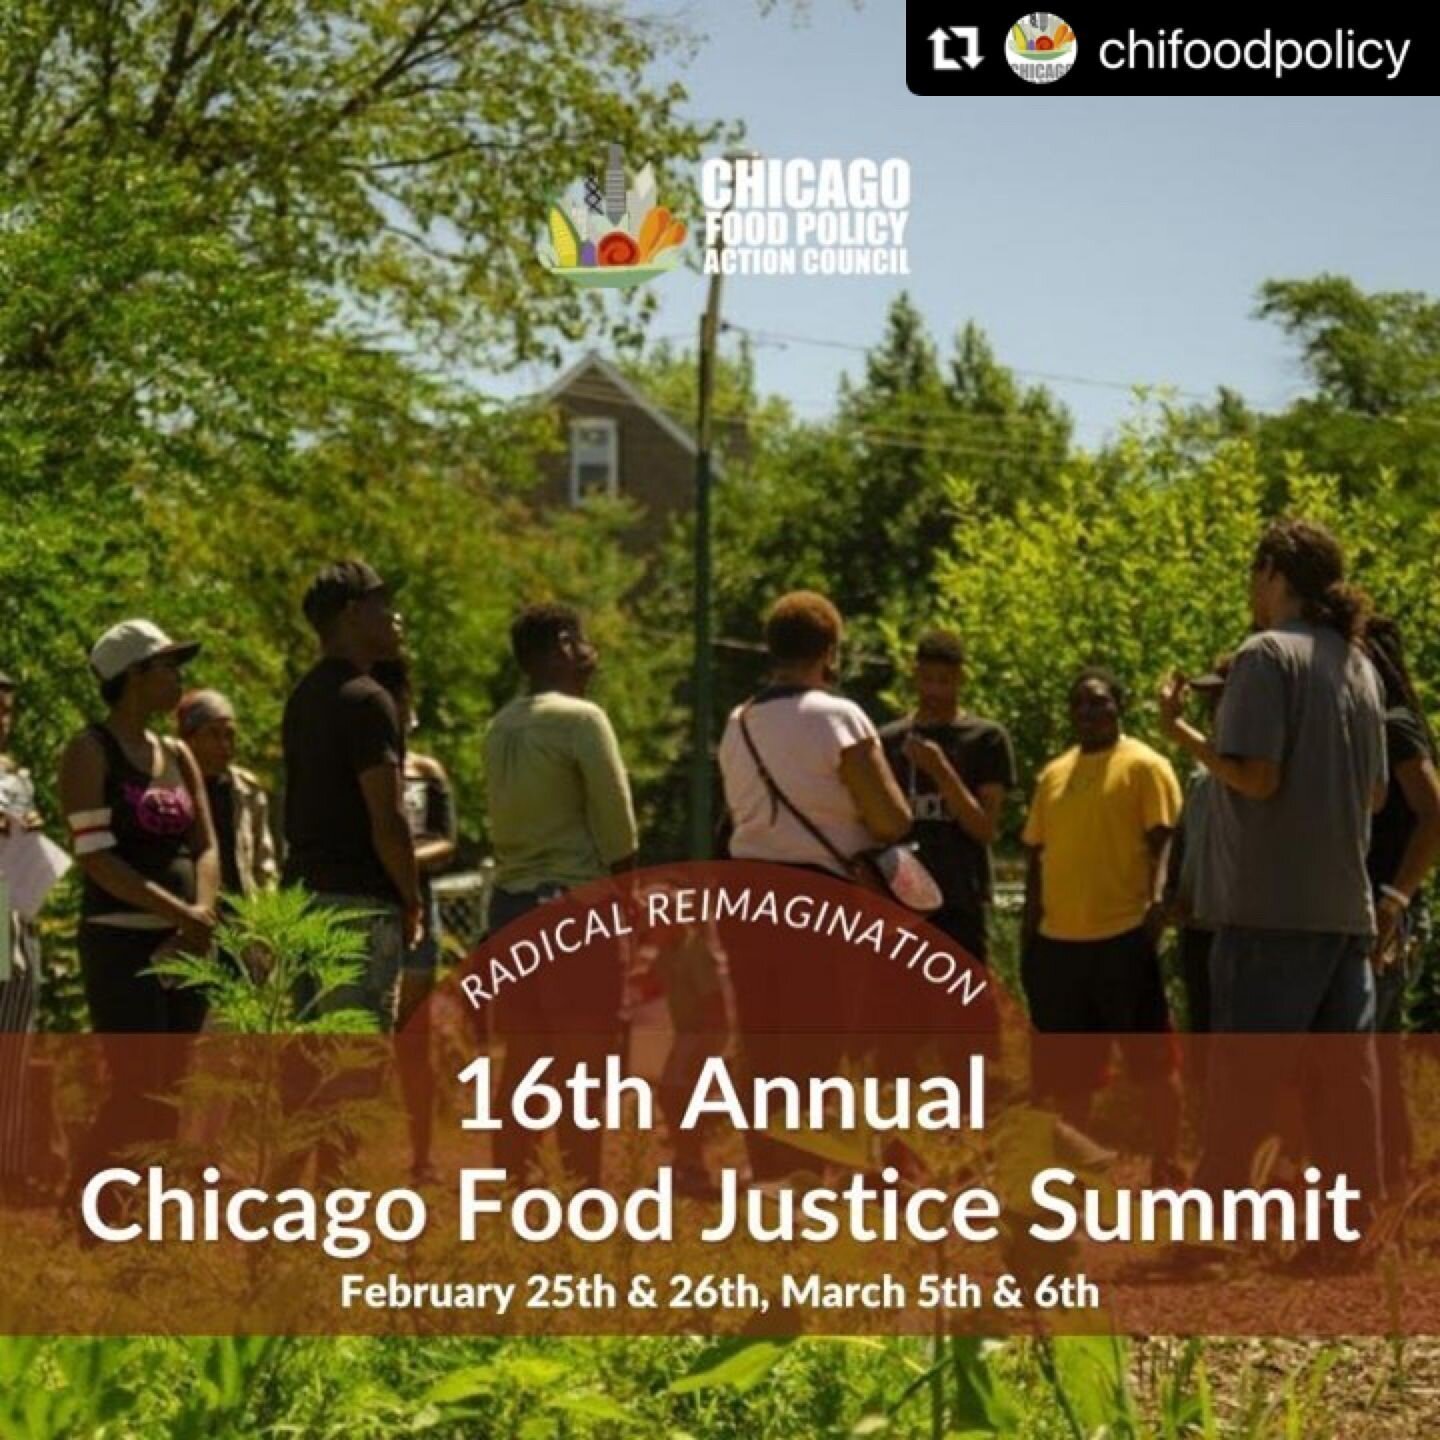 The @Chifoodpolicy 16th Annual Food Justice Summit is TOMORROW!!! Go to their page or the link in our bio to register, we&rsquo;ll see you there!!

#FoodJustice #FarmersOfColor #BlackFarmers #FarmersOfIllinois #BIPOCFarmers #StewardsOfTheLand #FoodJu